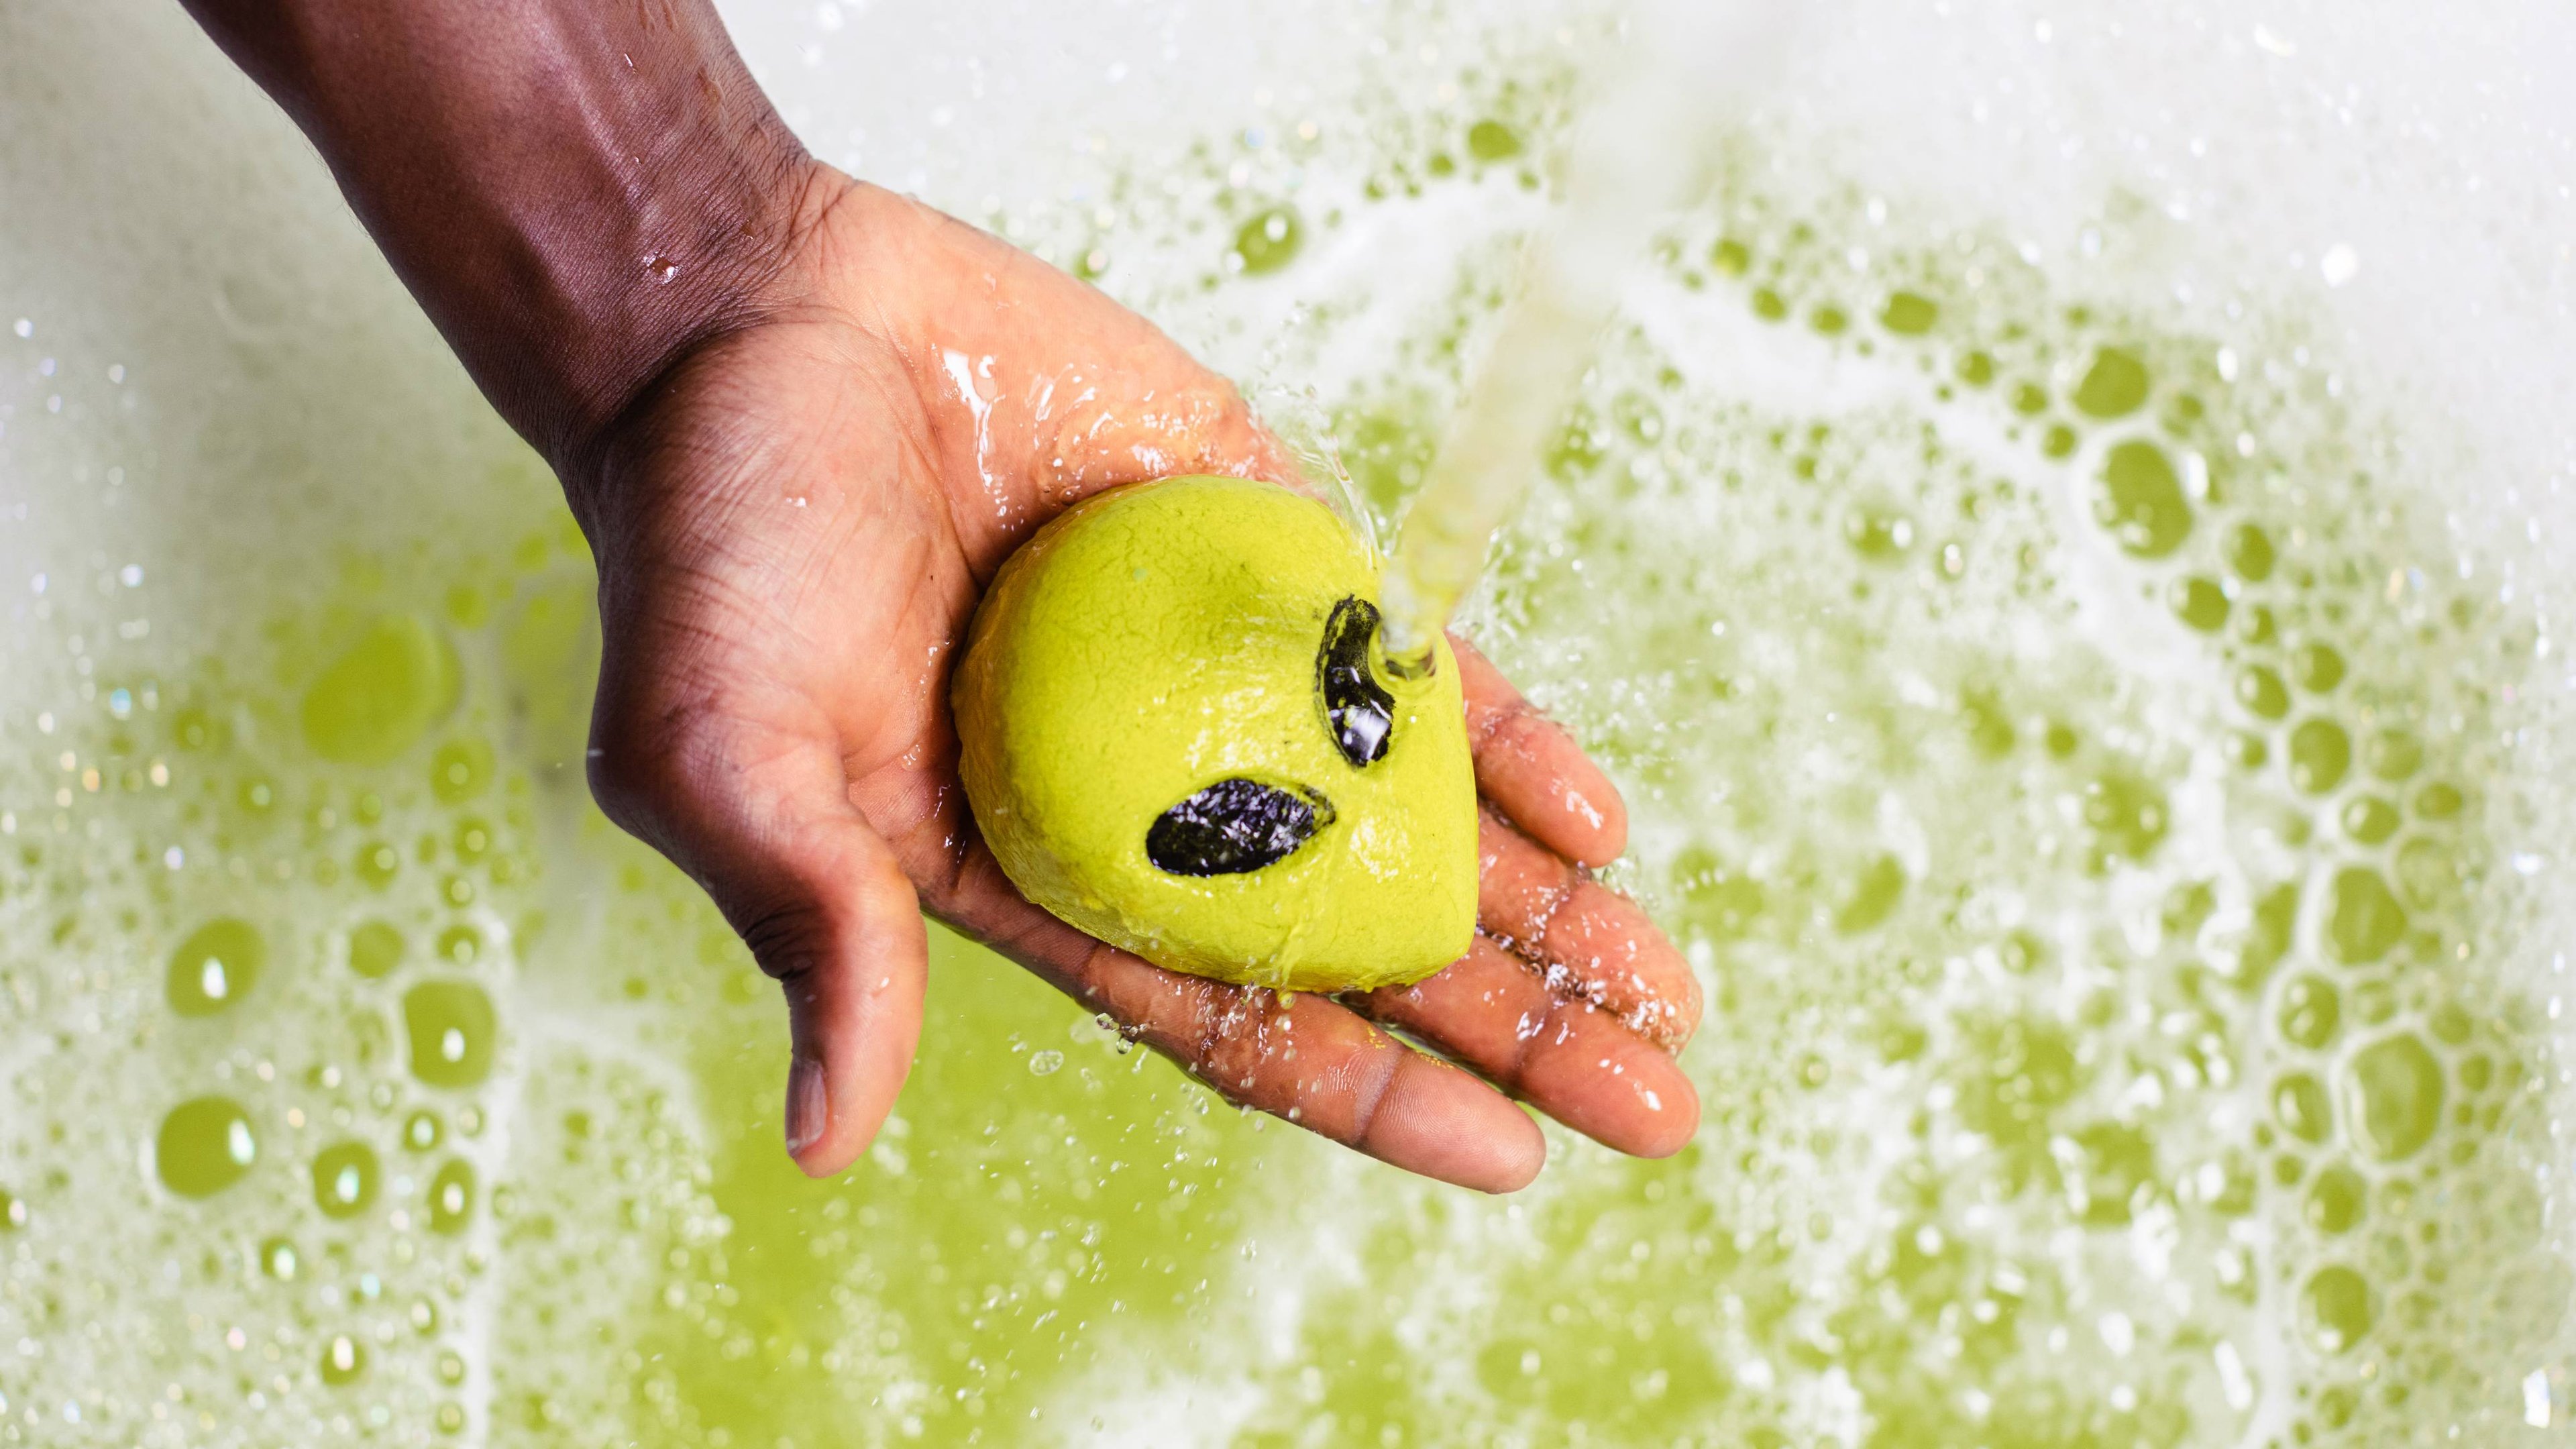 Model is holding the Alien bubble bar under running bath water above a foamy, bubble, ethereal-green sea of water.